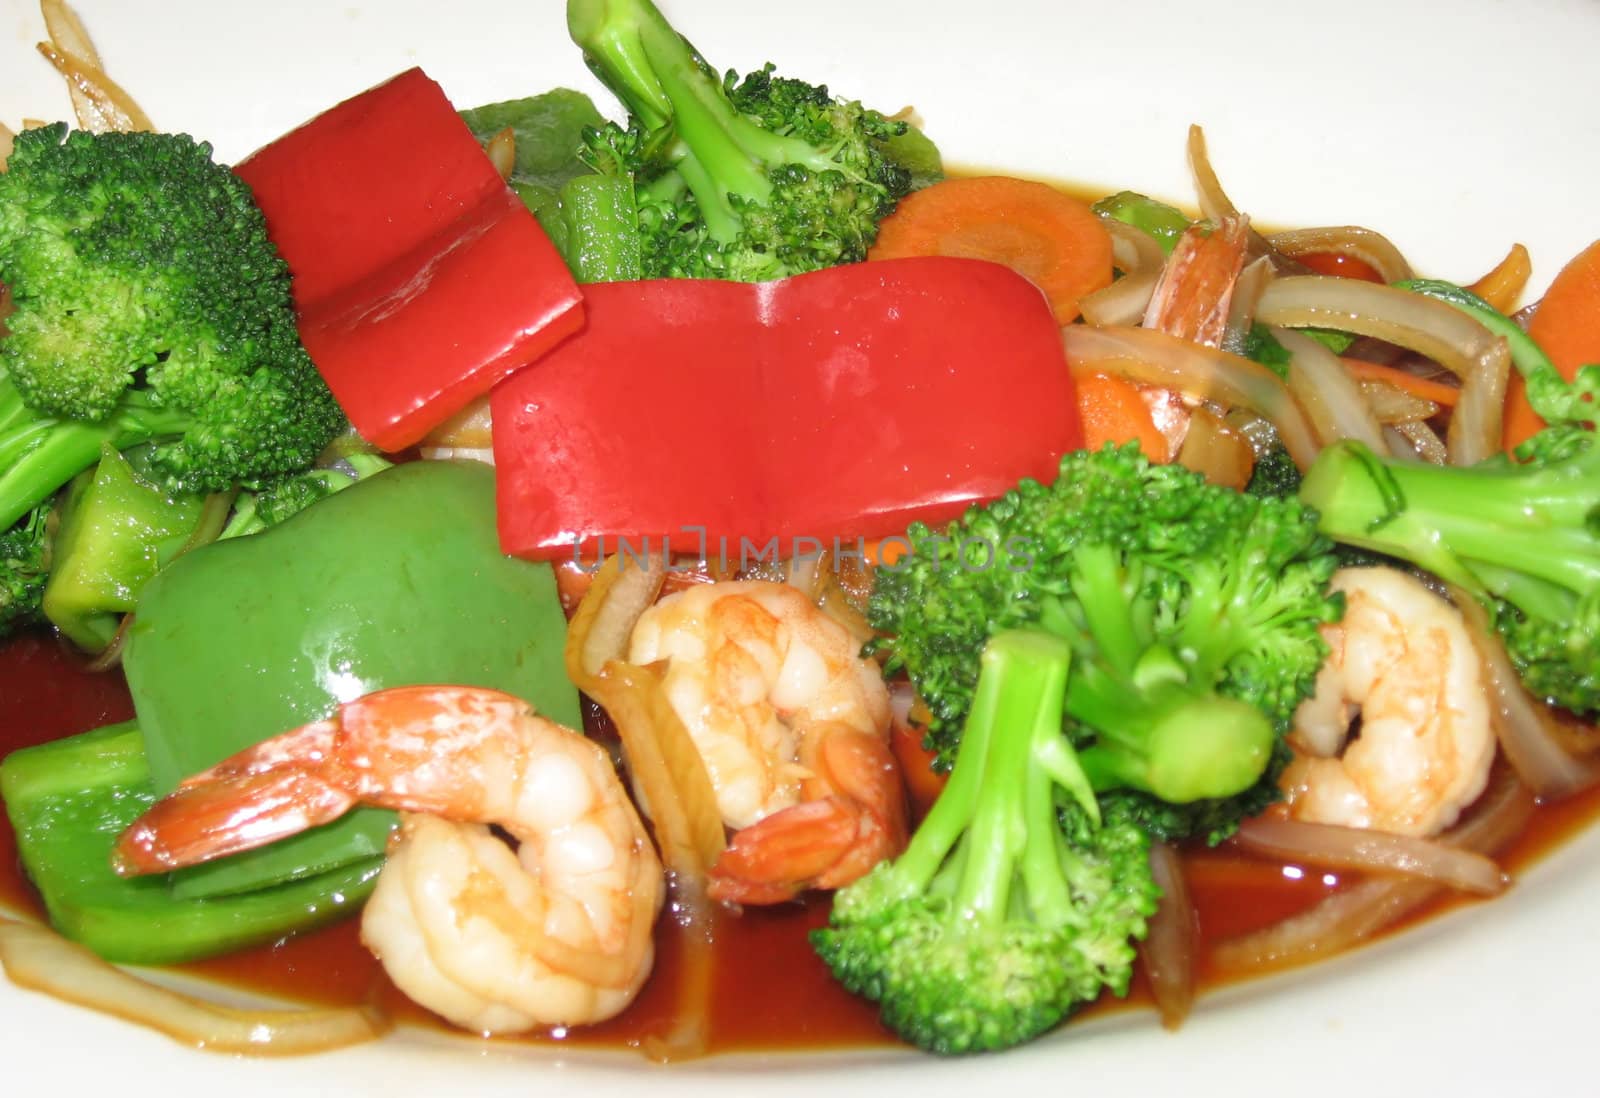 Plate of shrimp stir fry with broccoli and red peppers, against a white background